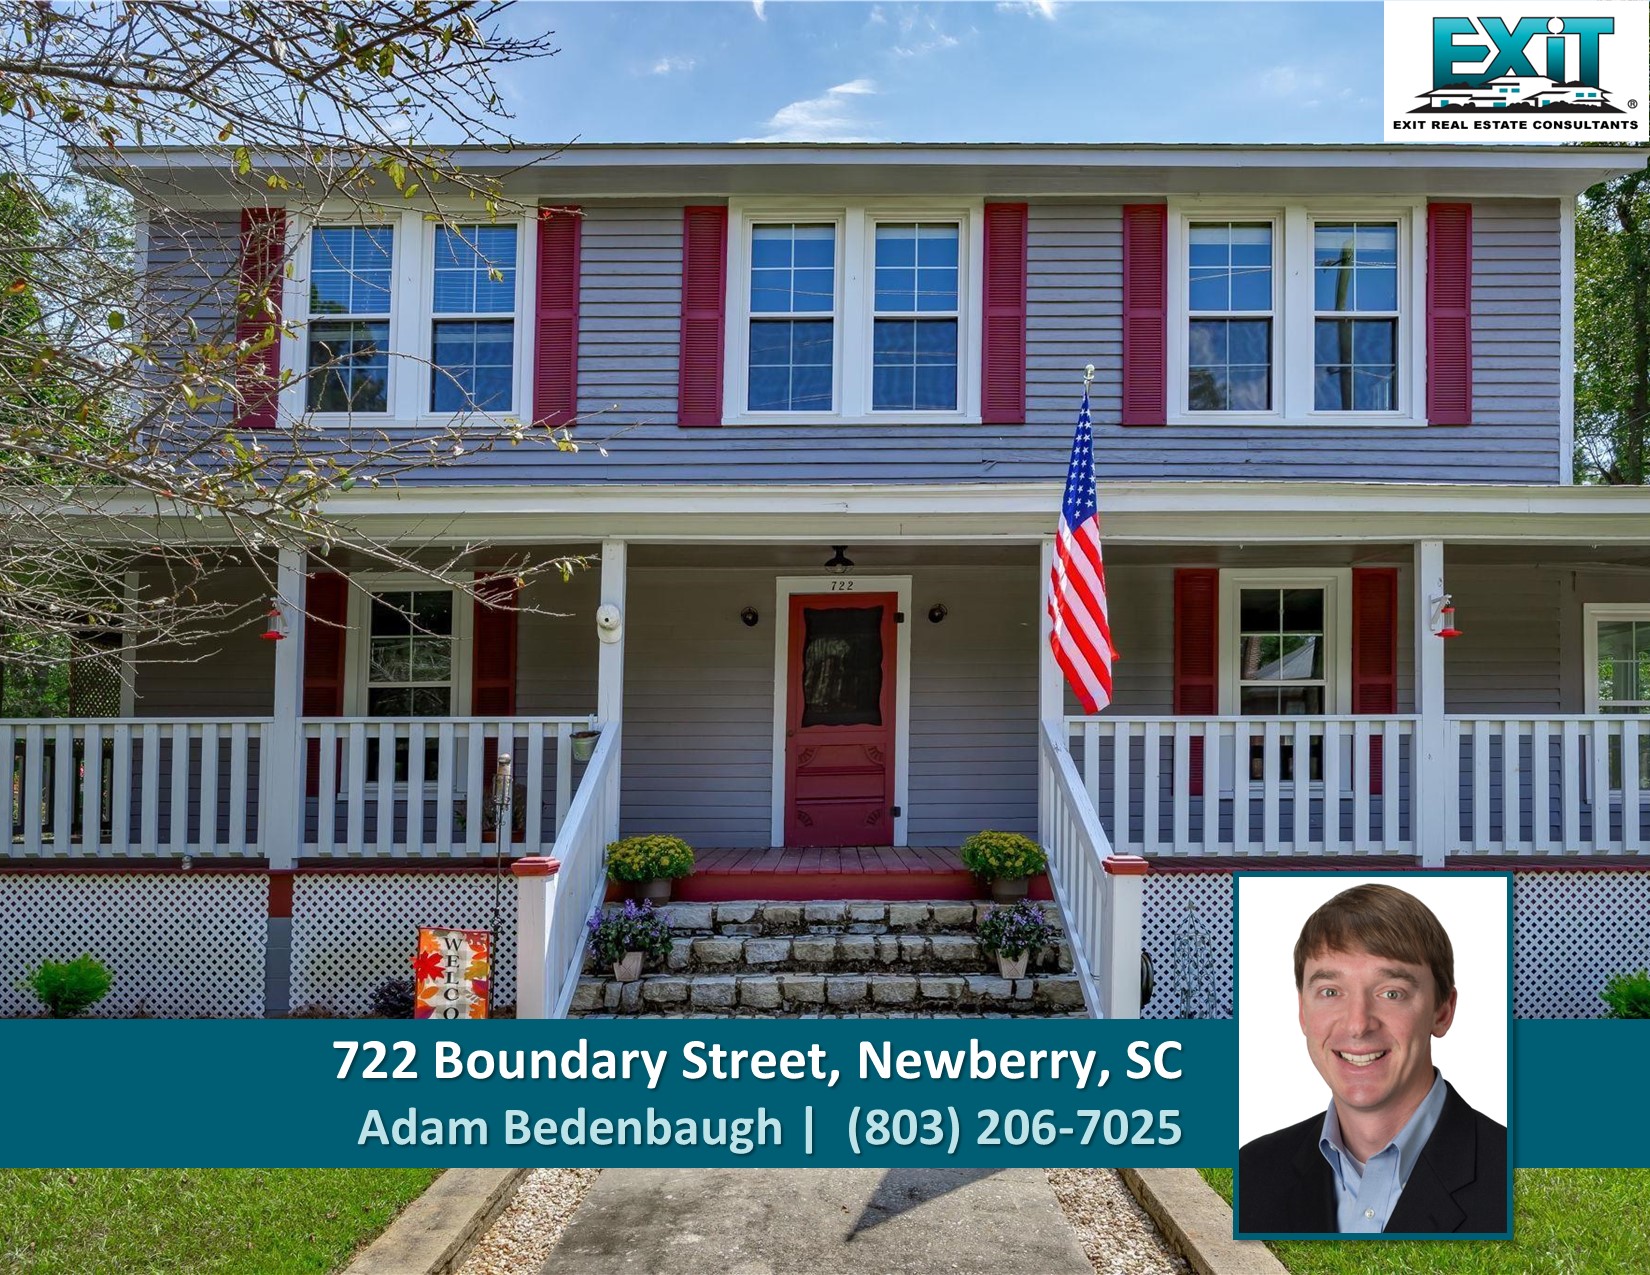 Just listed in Newberry